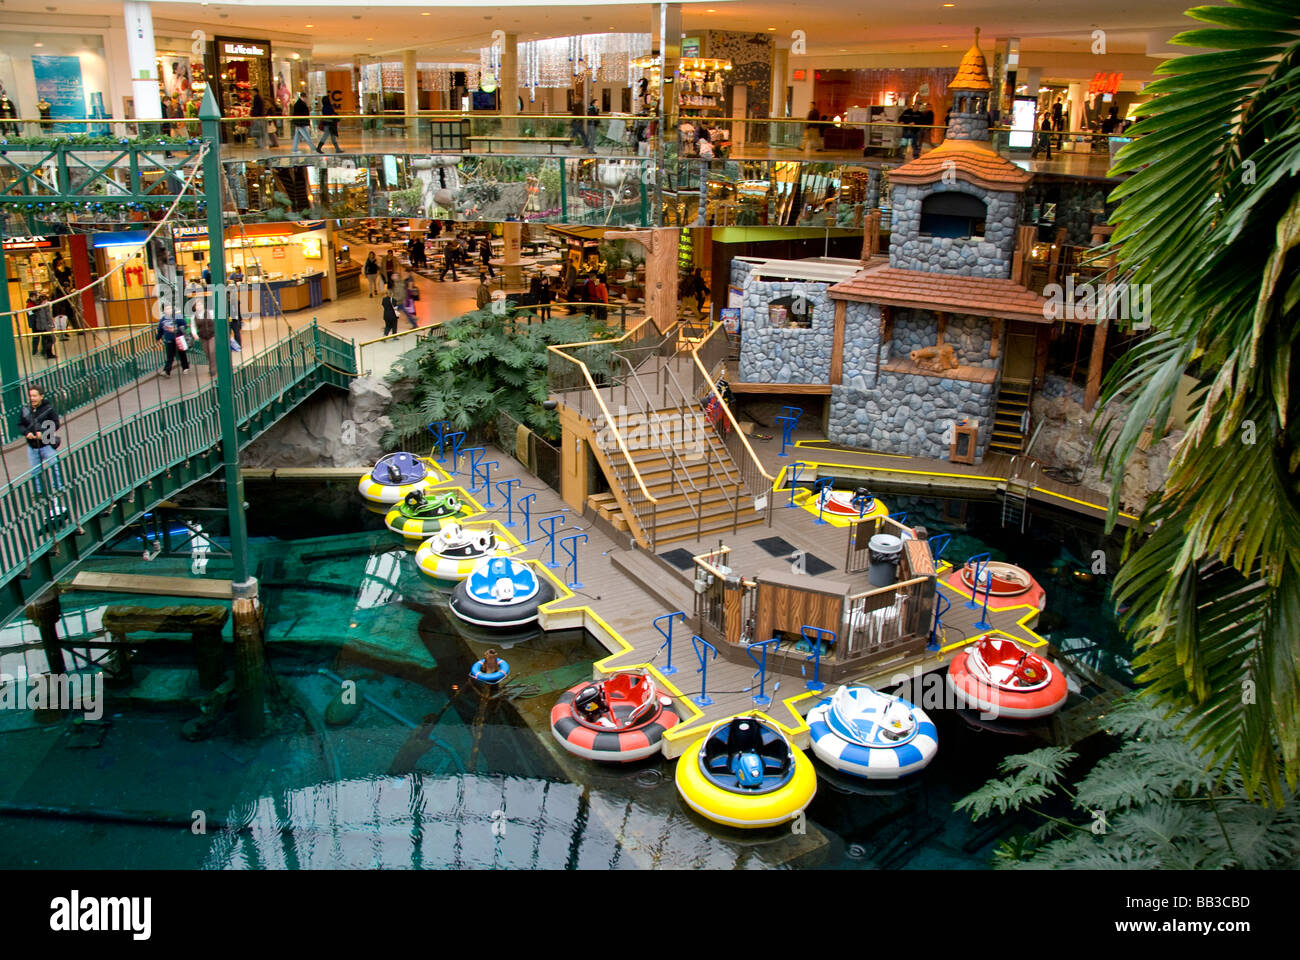 Canada, Alberta, Edmonton. West Edmonton Mall. Canada's 2nd most visited destination toped only by Niagara Falls. Bumper boats. Stock Photo